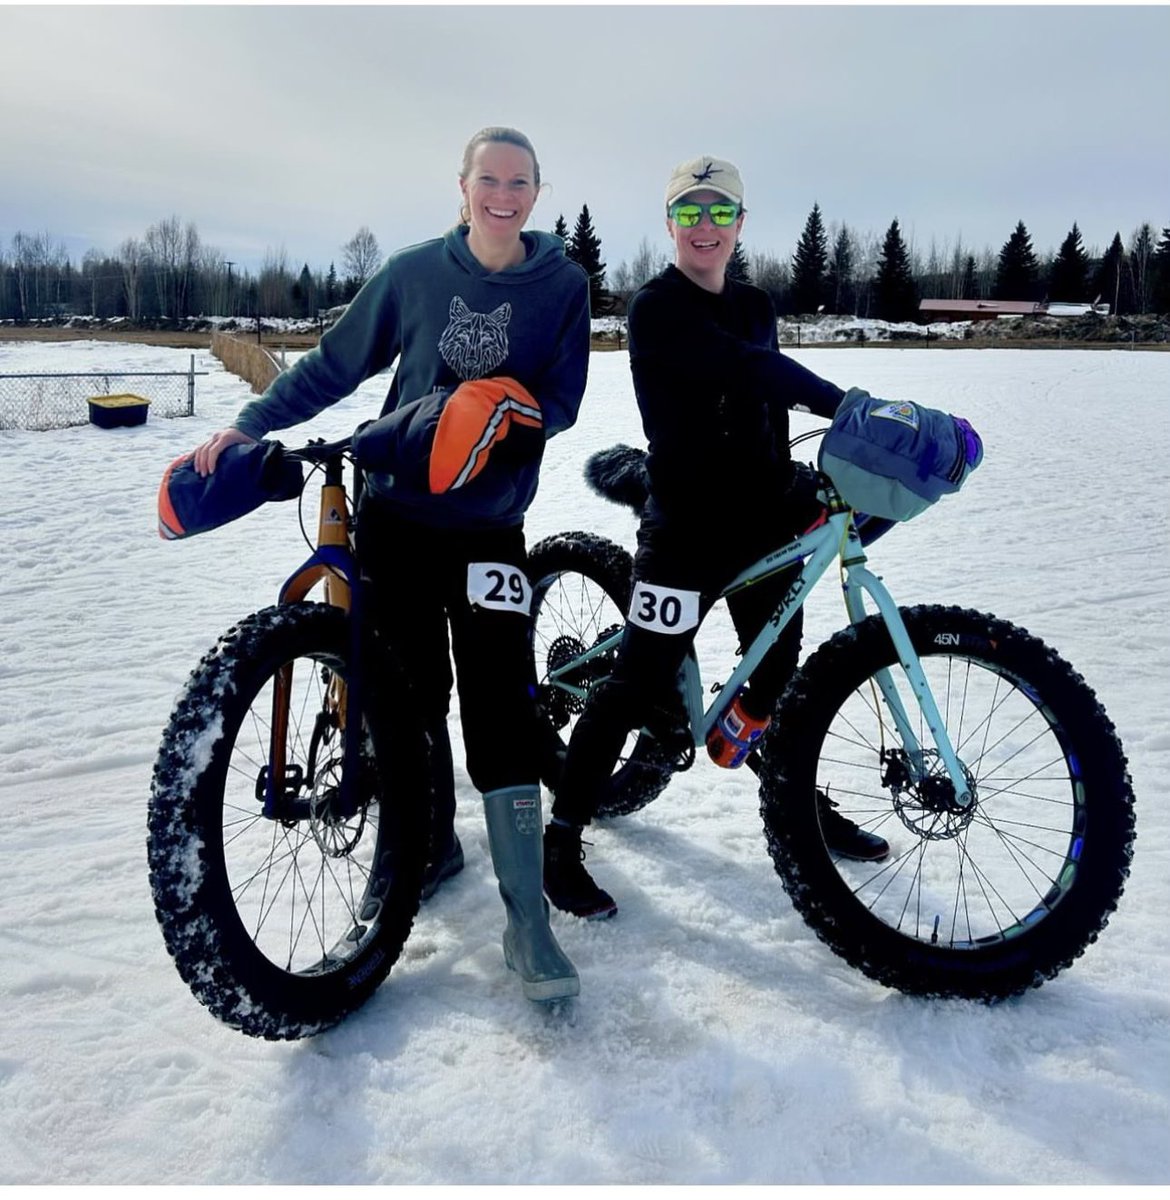 Alumni Spotlight: Nikki Preston, class of 2011 and former All Conference and NCAA All Tournament Team Member competing in a bike race in Fairbanks, Alaska. Proud of you, Nikki!